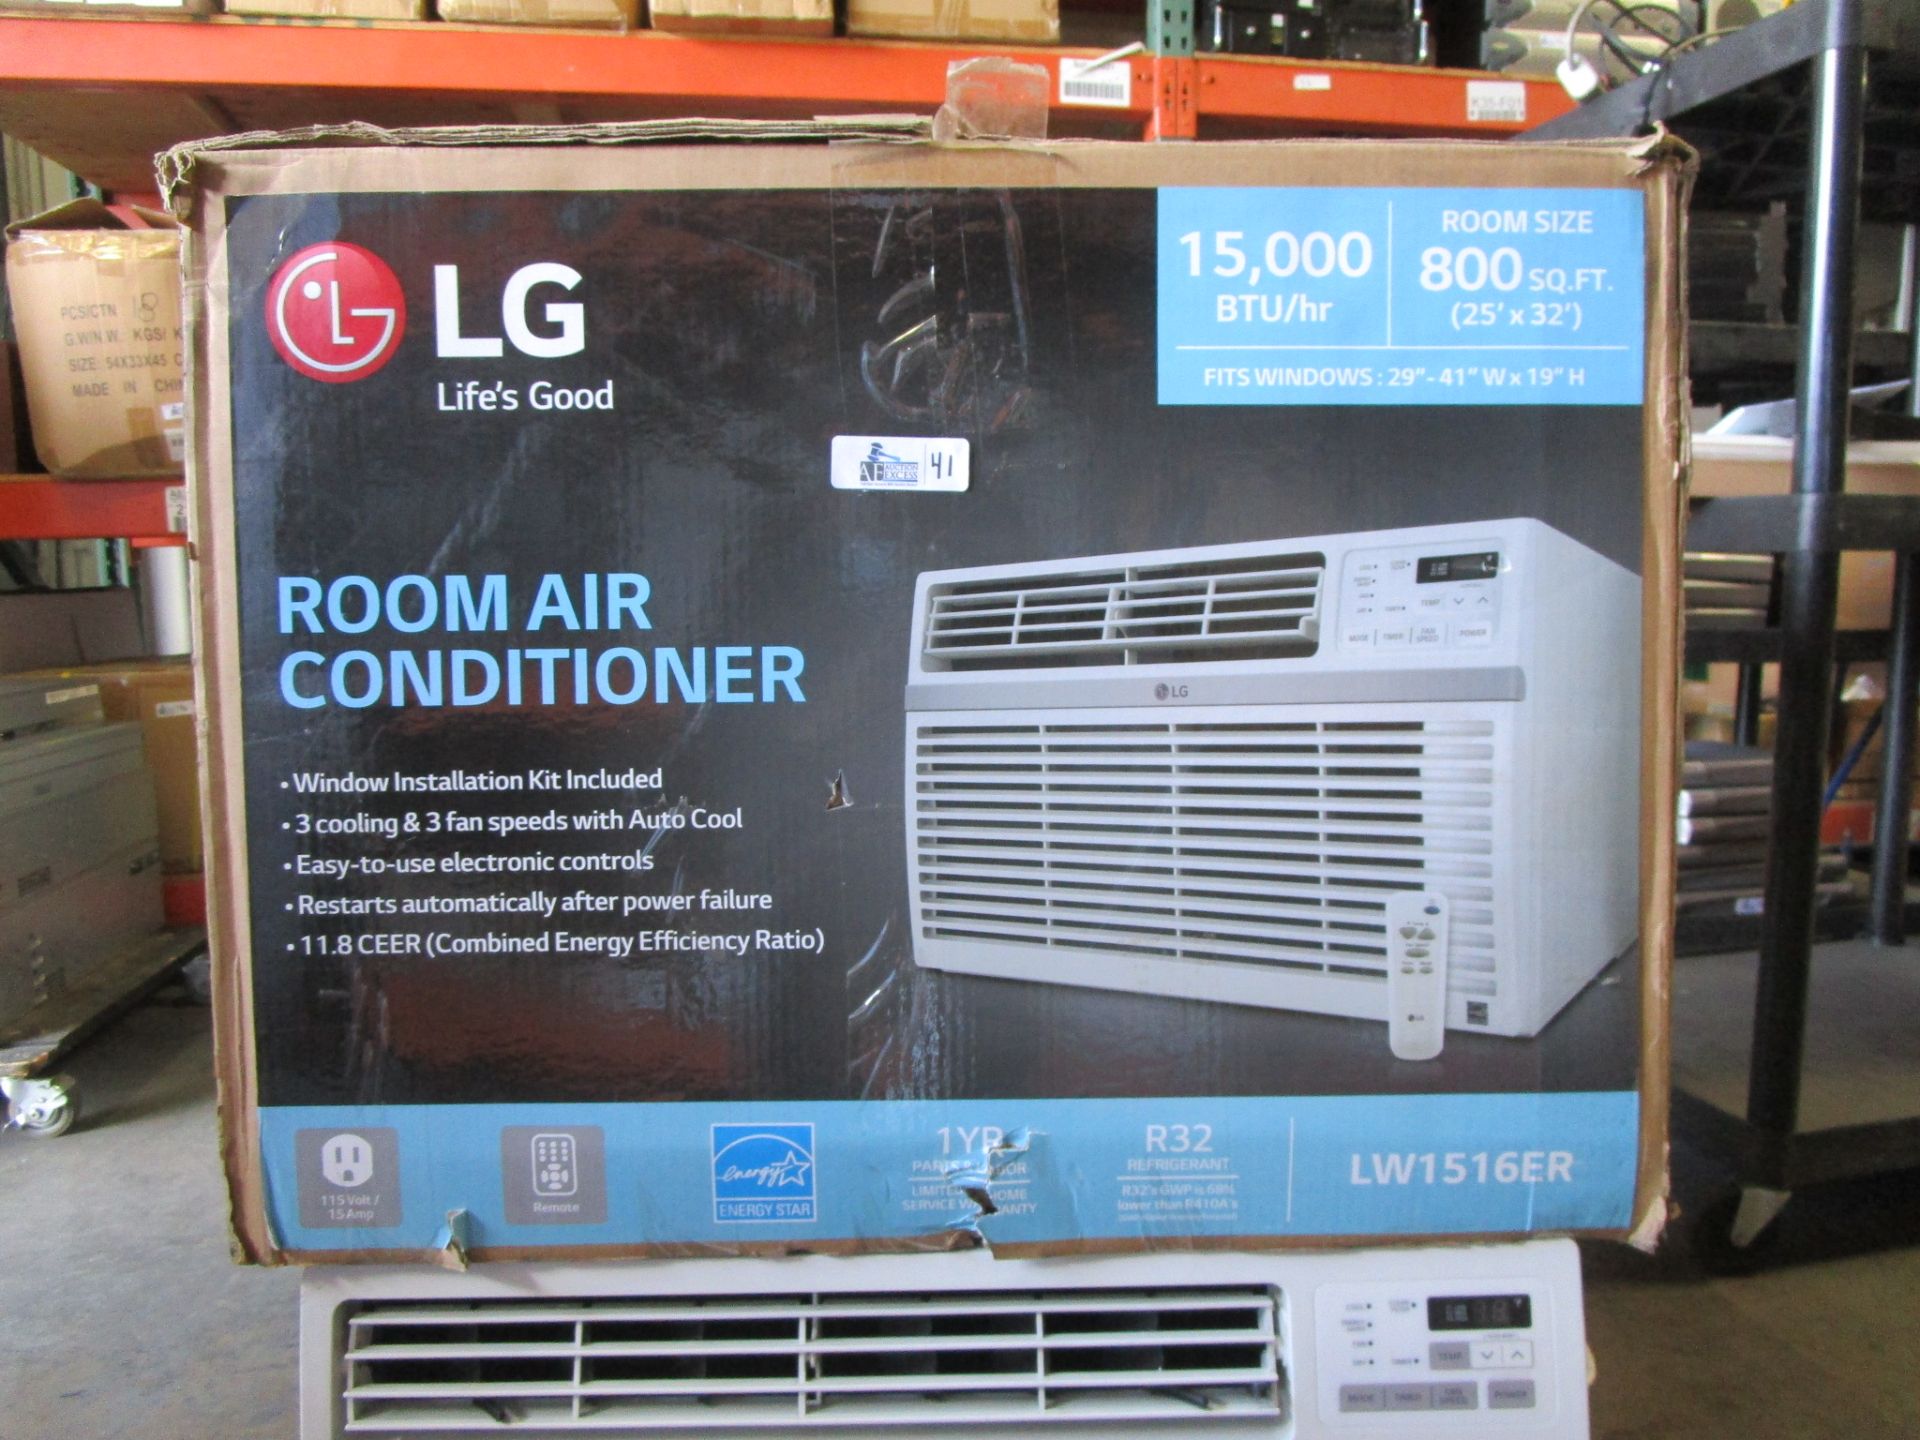 LG LW1516ER ROOM AIR CONDITIONER - Image 3 of 4